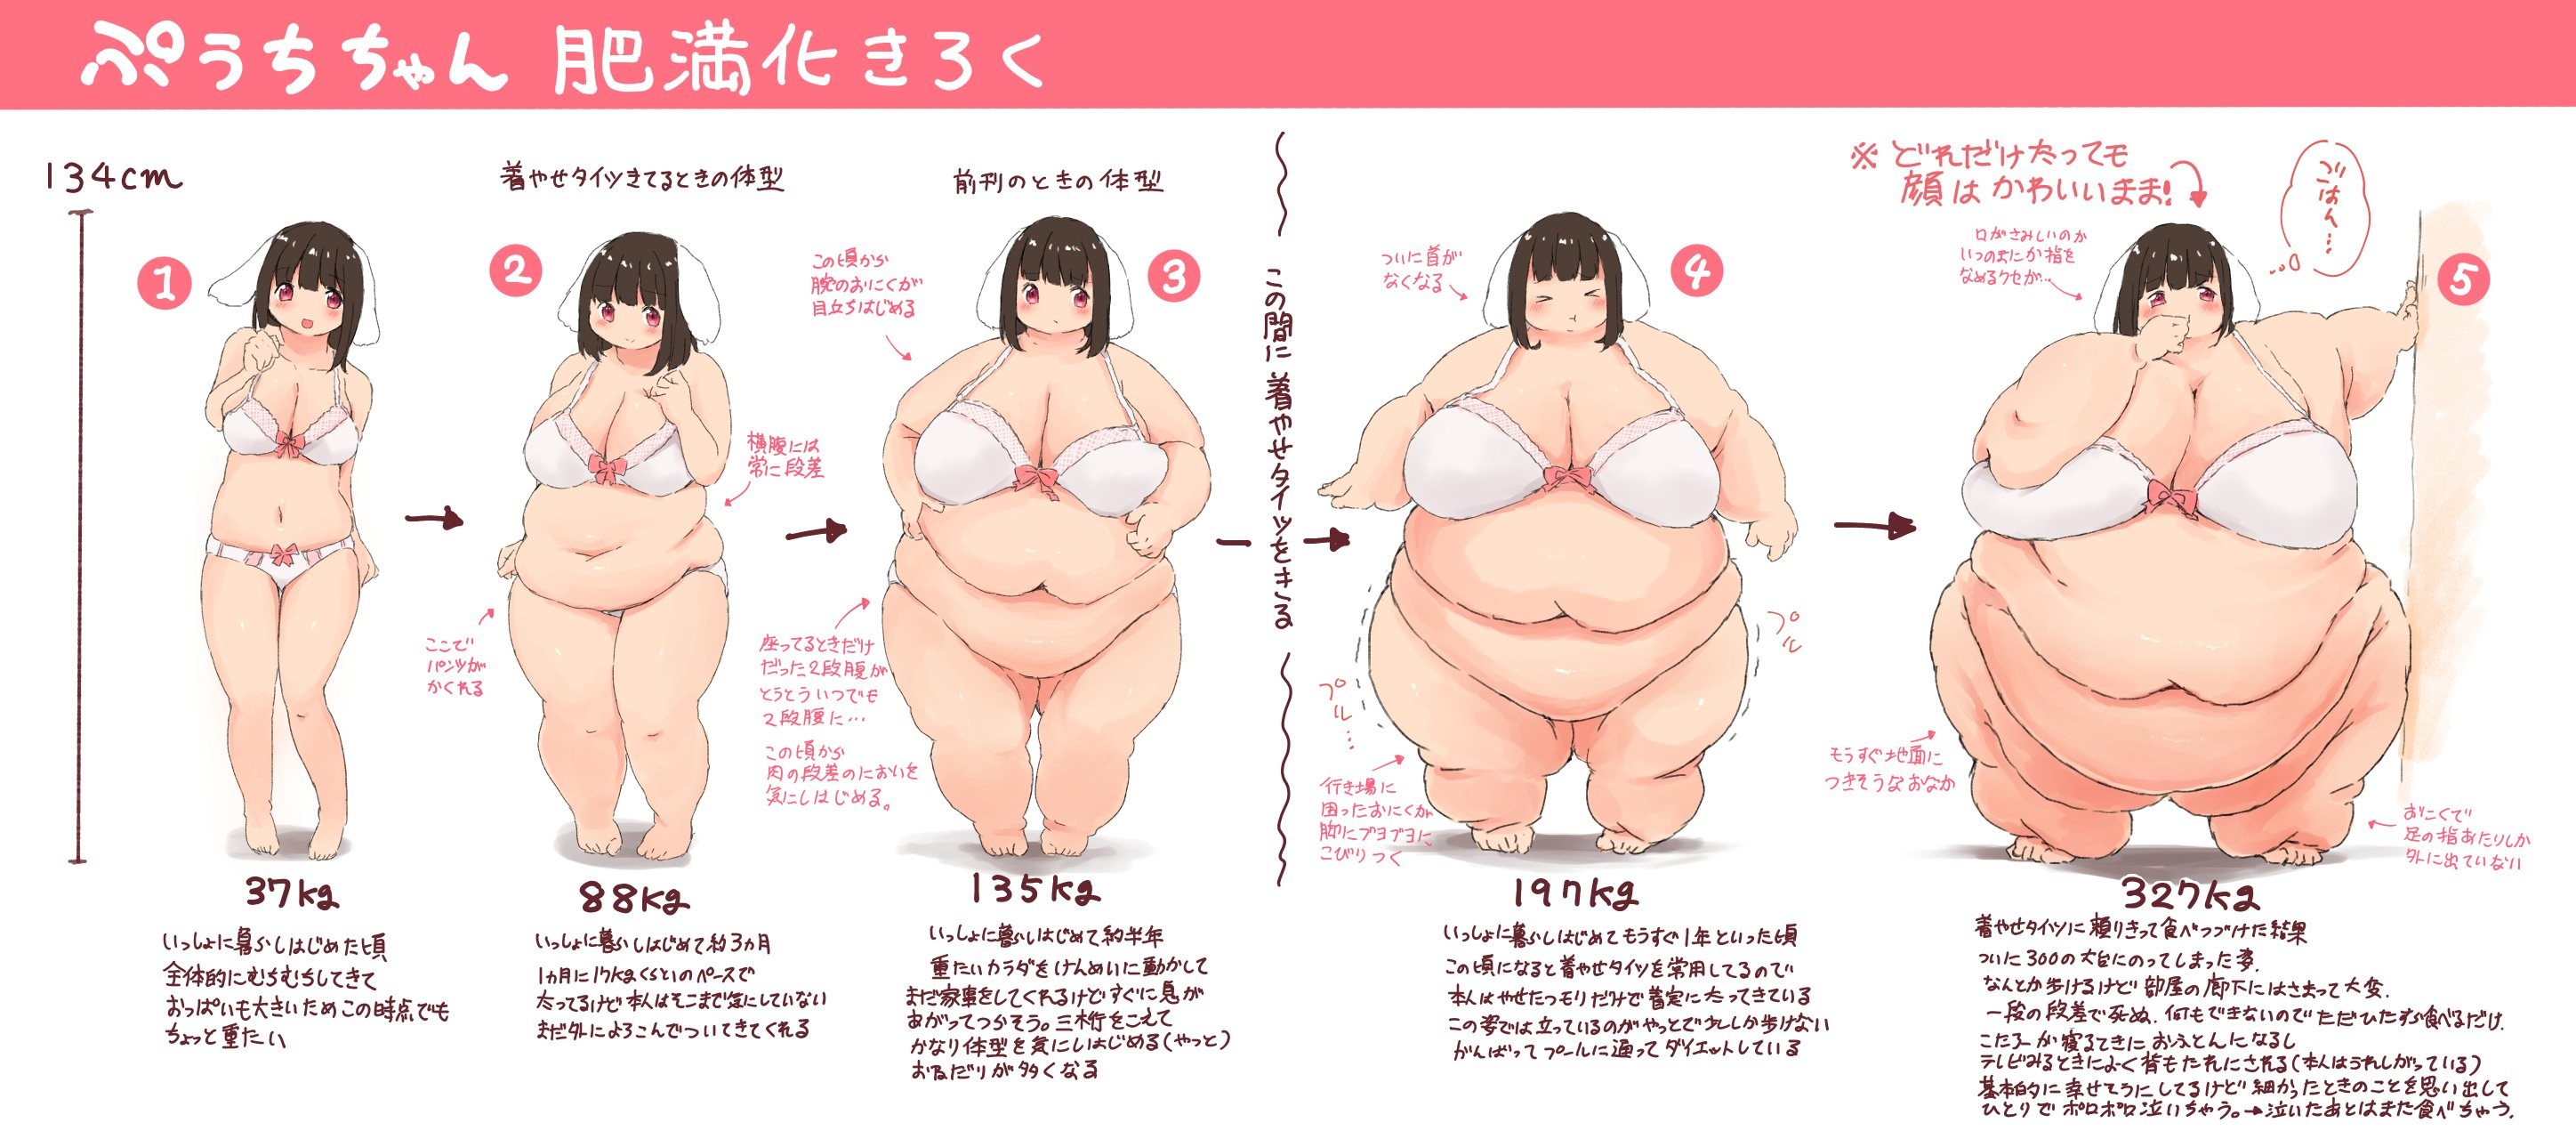 Fat Anime Lesbian Porn - Sex with Fat Women of Different Ages (74 photos) - porn ddeva